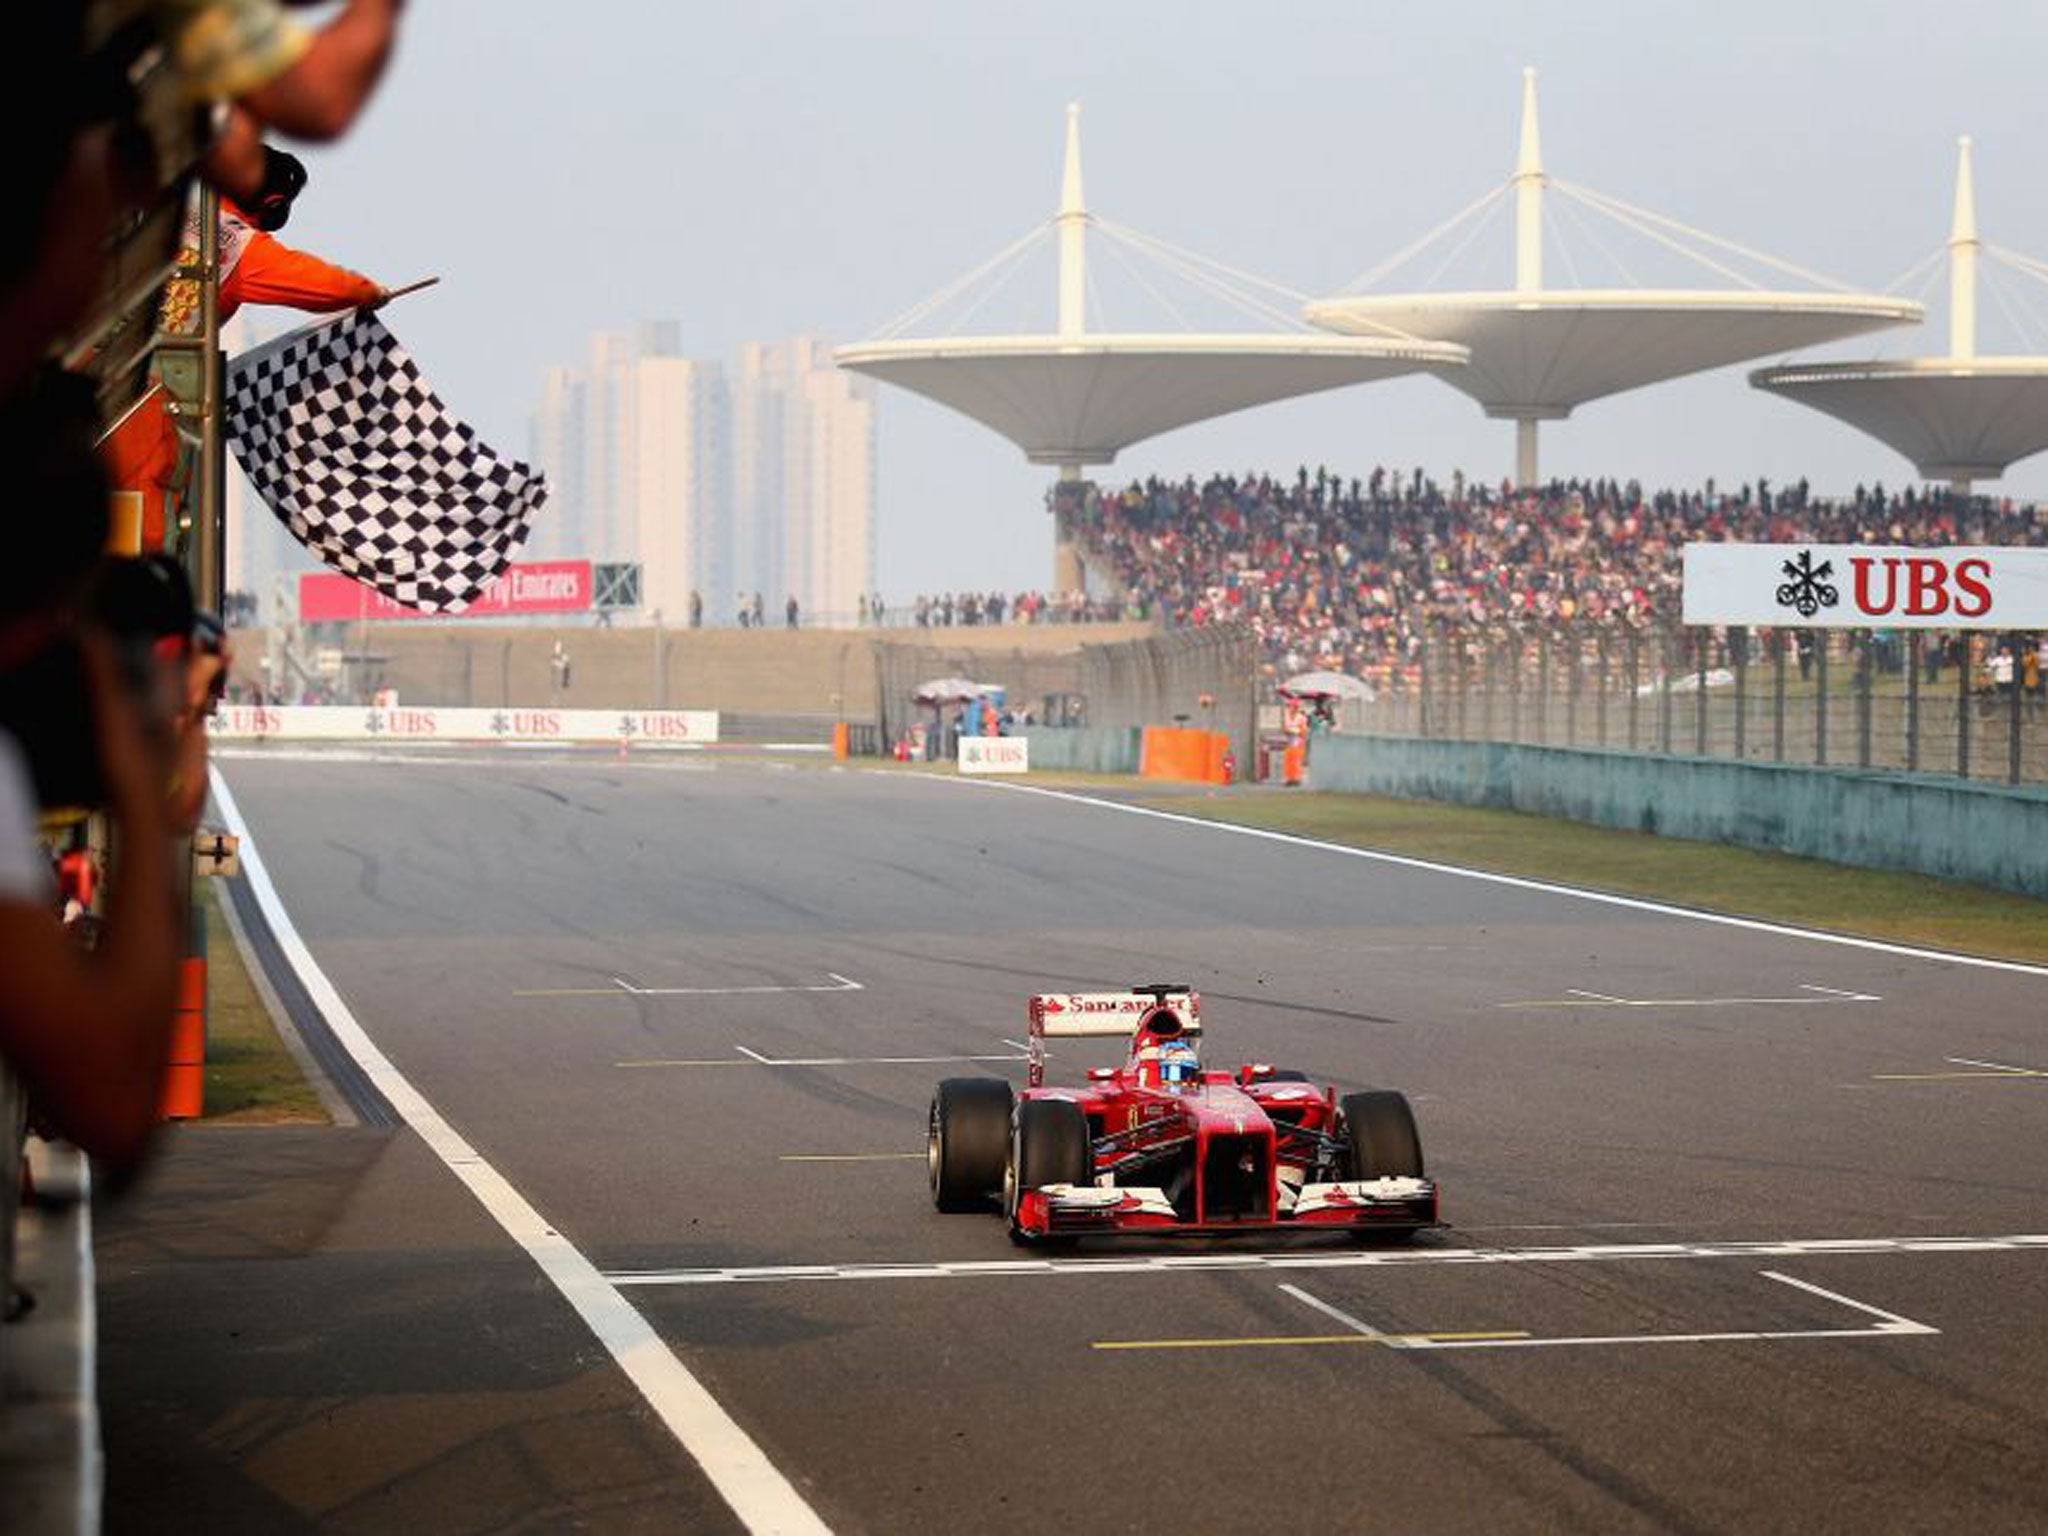 Ferrari’s Fernando Alonso takes the chequered flag in China